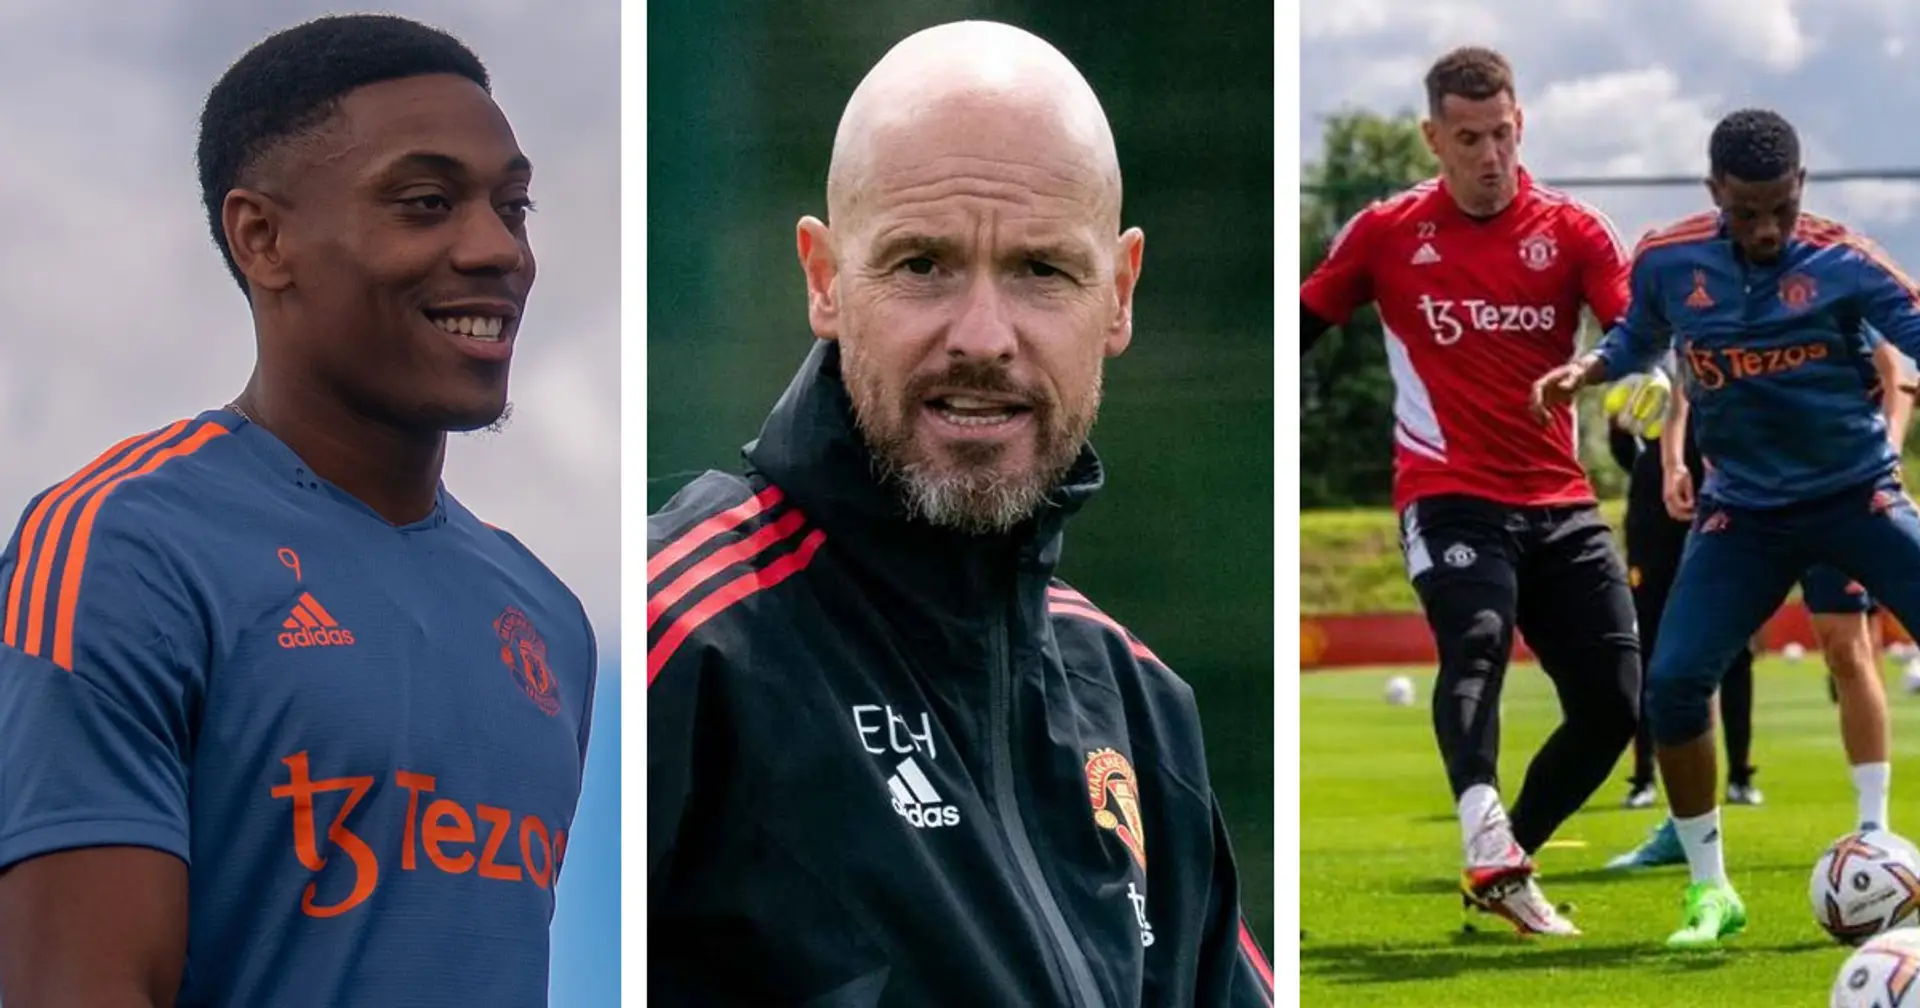 Goalkeepers play like outfielders, smiling Martial and 4 more things we spotted in Ten Hag's first Man United training session